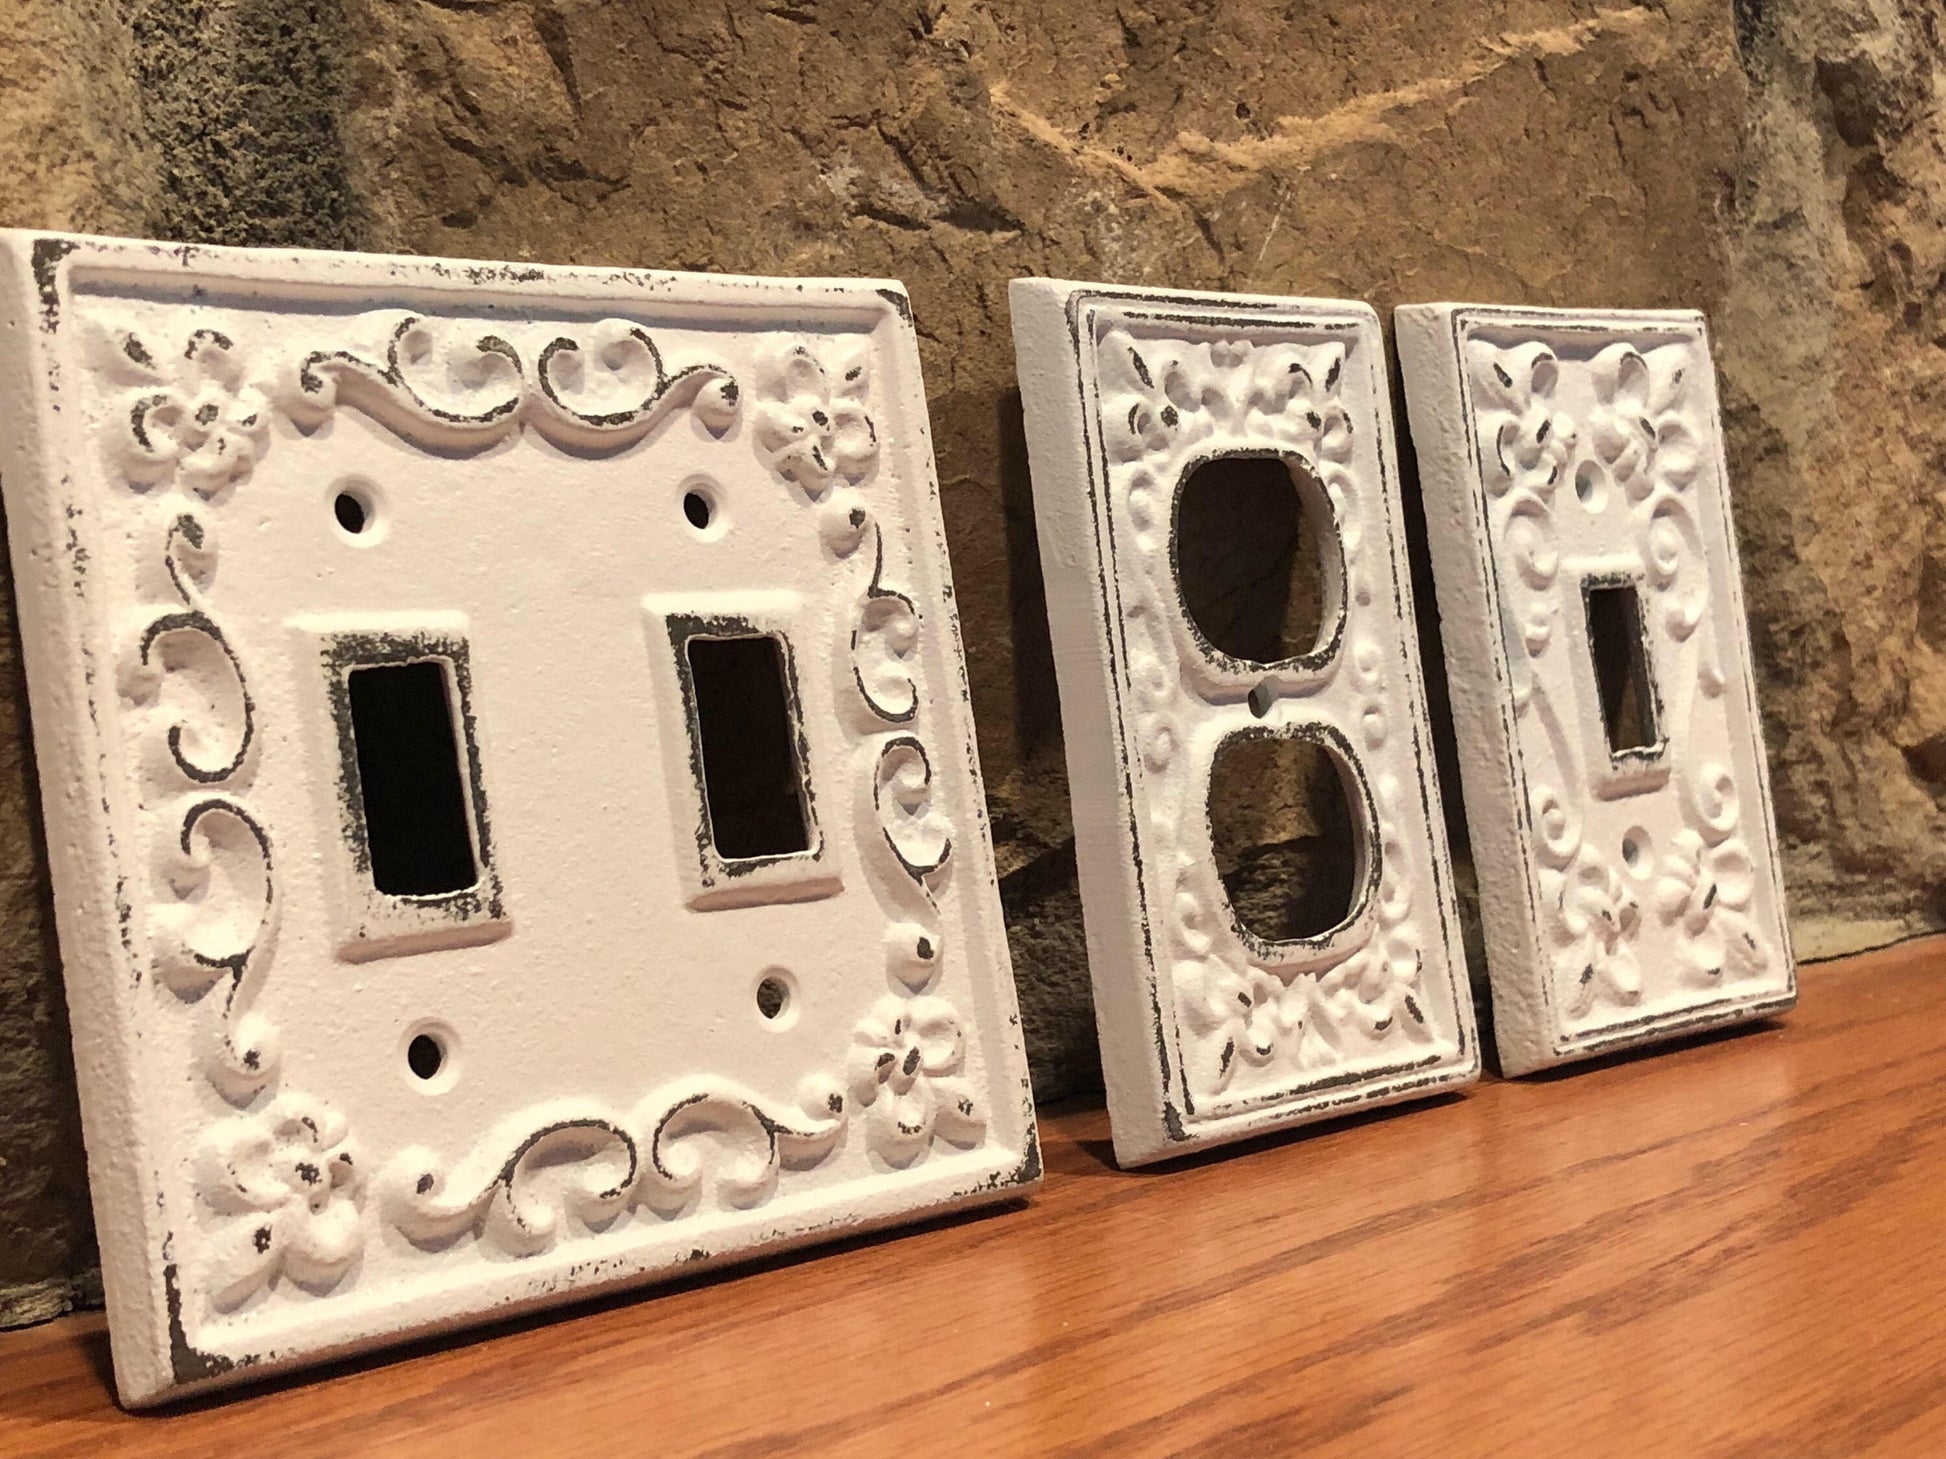 BIG SALE/Light switch plate/Light Switch Cover/Plug cover/Nursery/Bedroom/Cast iron plug/ Outlet Cover/ Shabby Chic/ Metal Plate Cover/